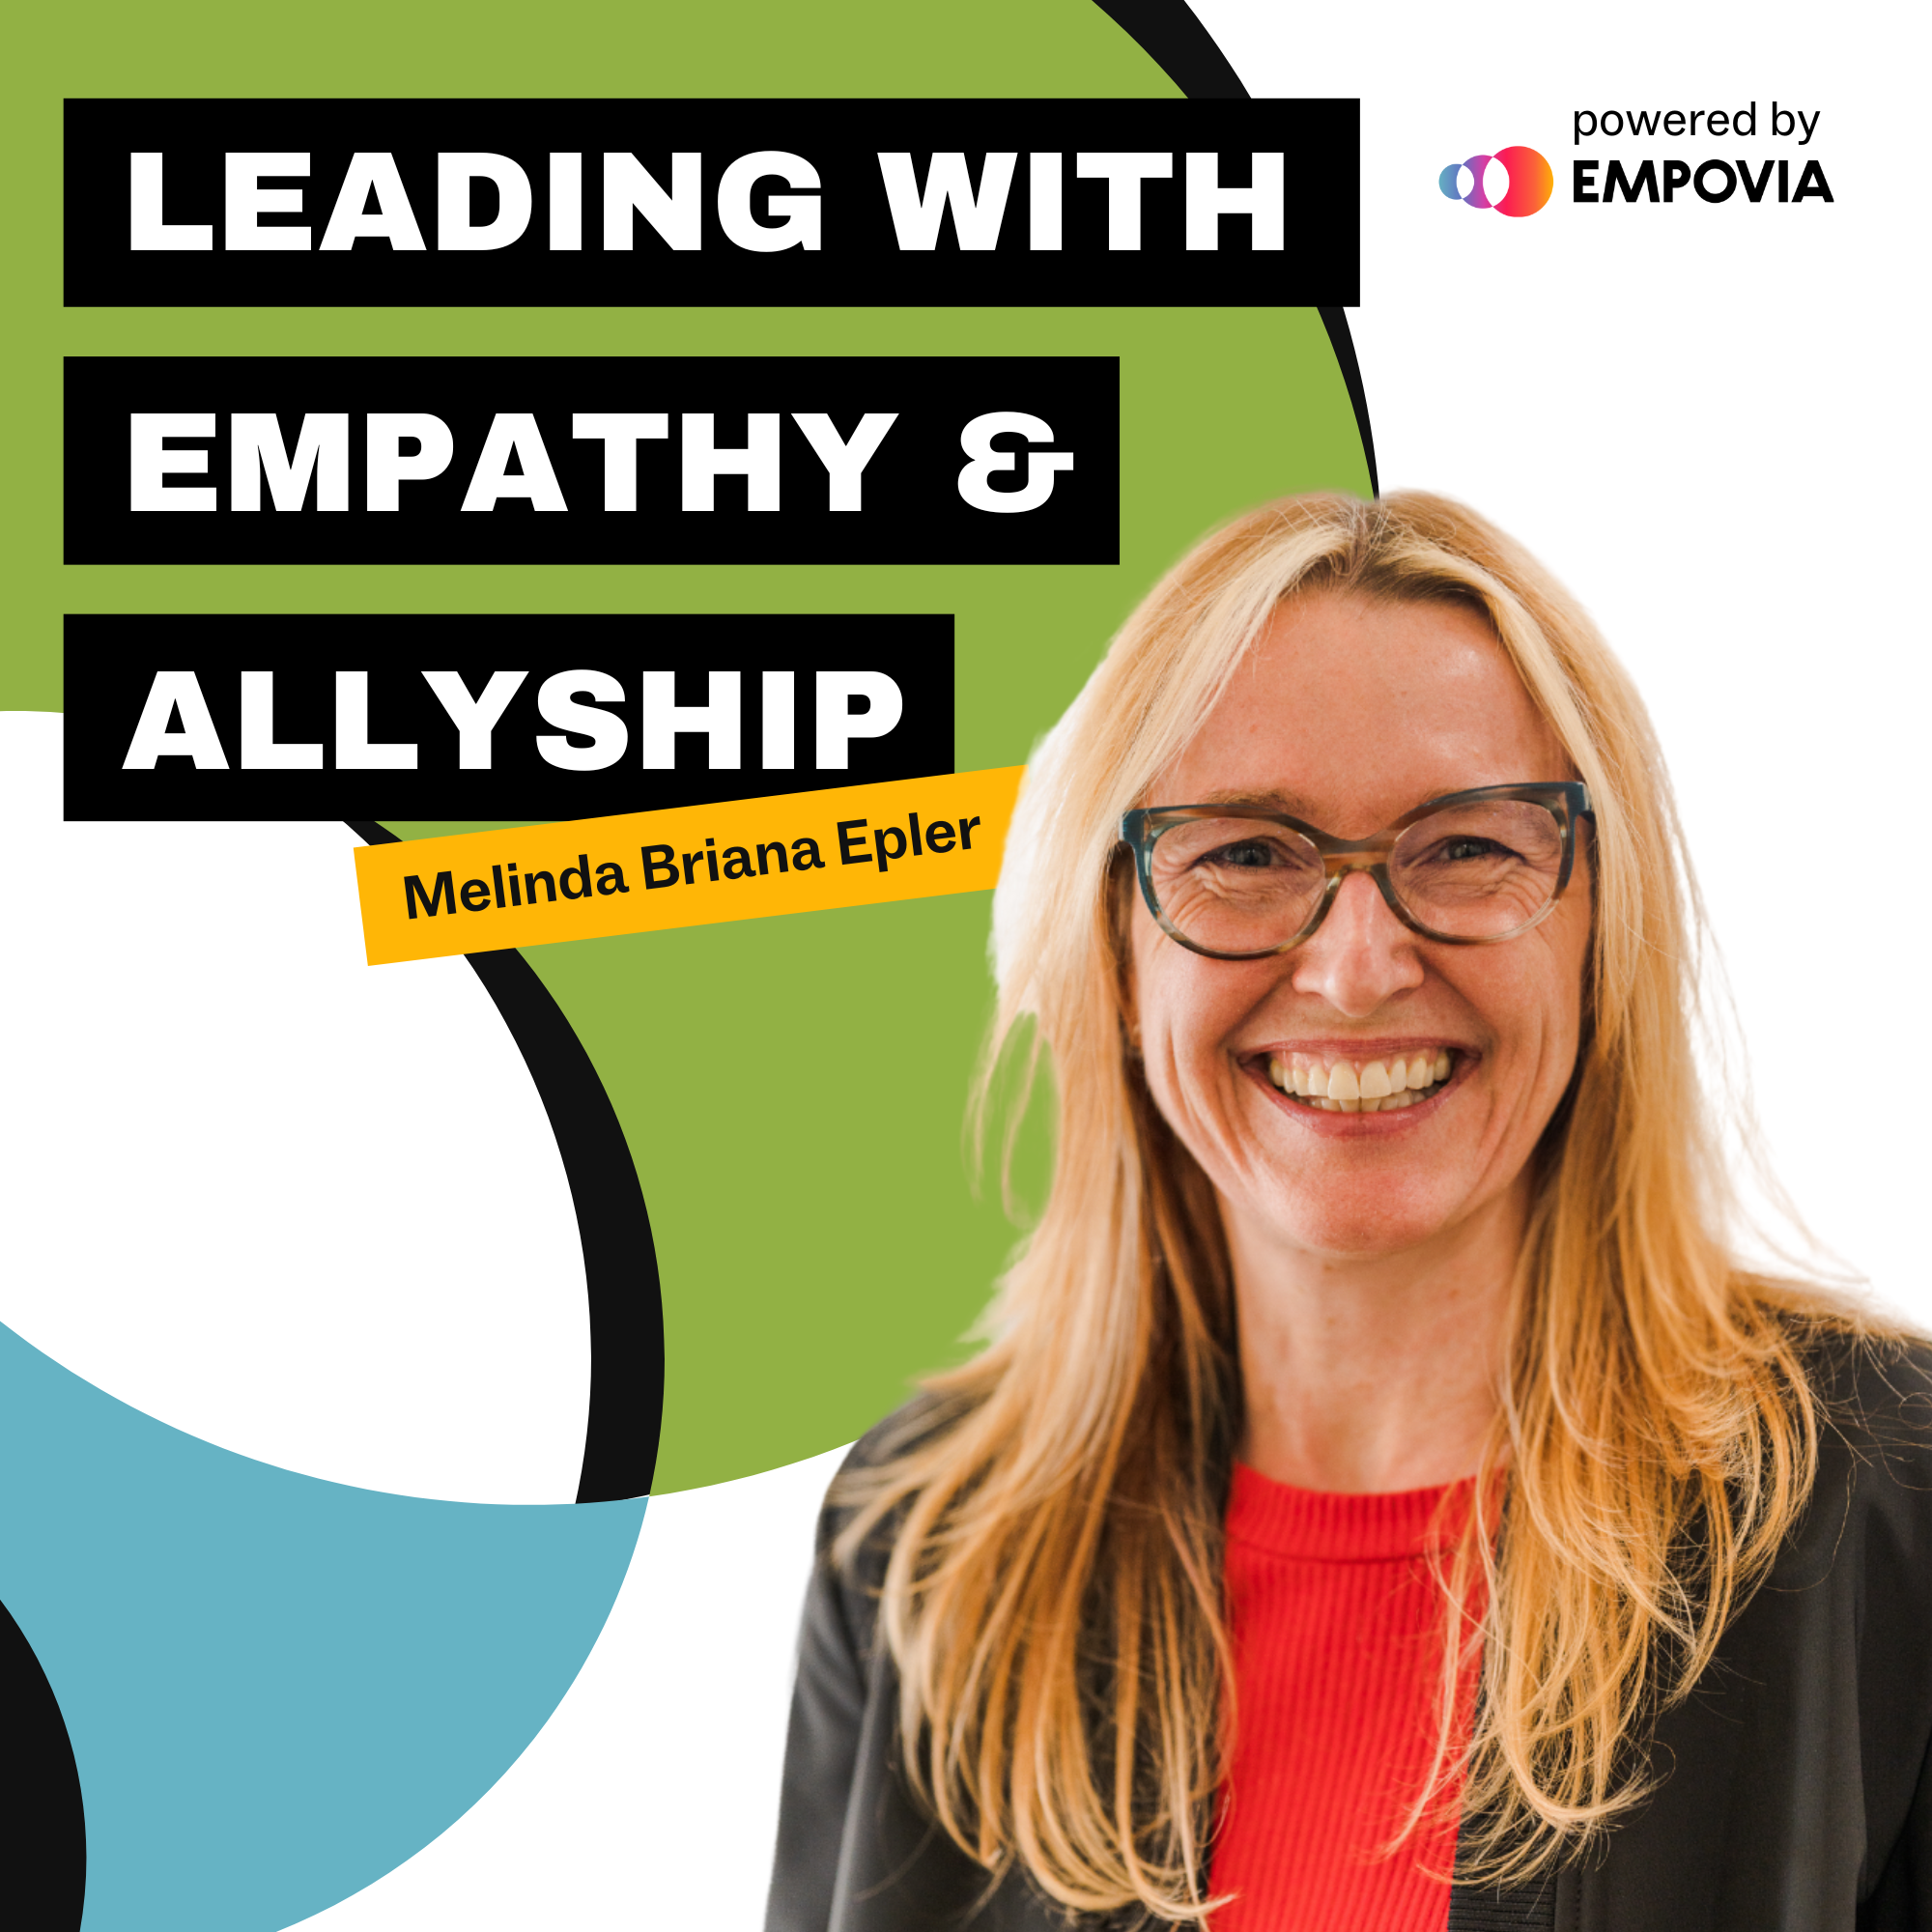 White graphic with blue and green partial circles with black accents, the Leading With Empathy & Allyship logo in white text on black rectangles, and a headshot of Host Melinda Briana Epler, a White woman with blonde and red hair, glasses, a red shirt, and black jacket.